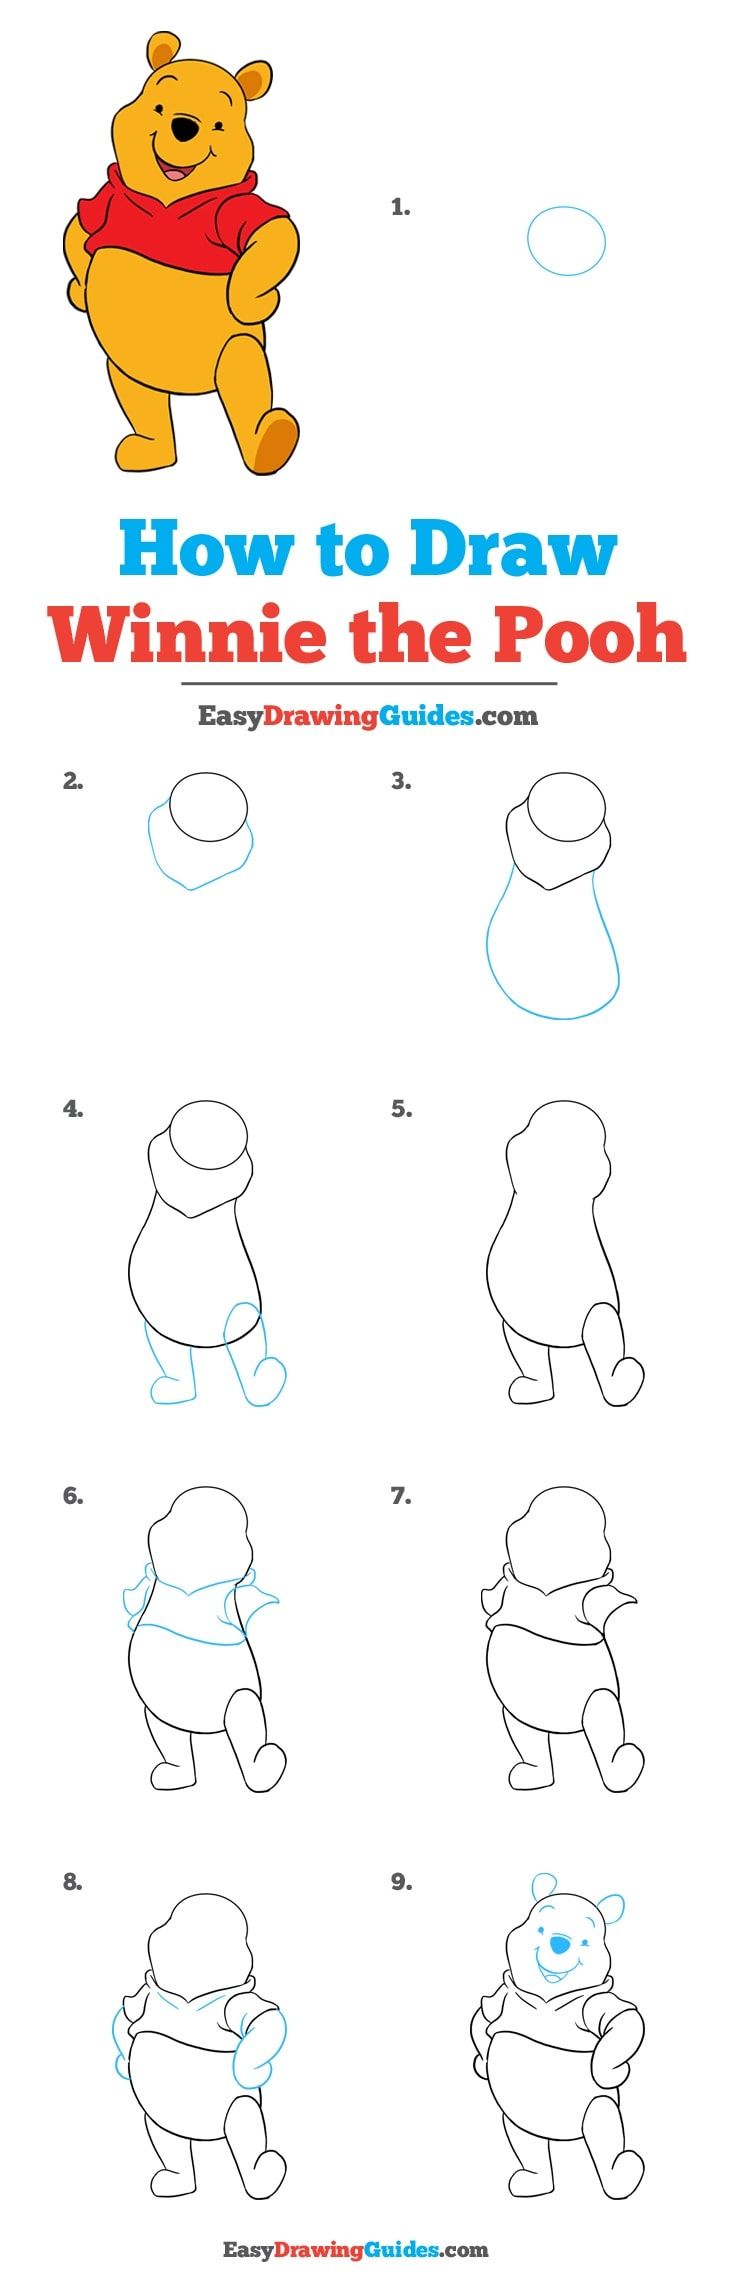 How To Draw Winnie The Pooh - Really Easy Drawing Tutorial